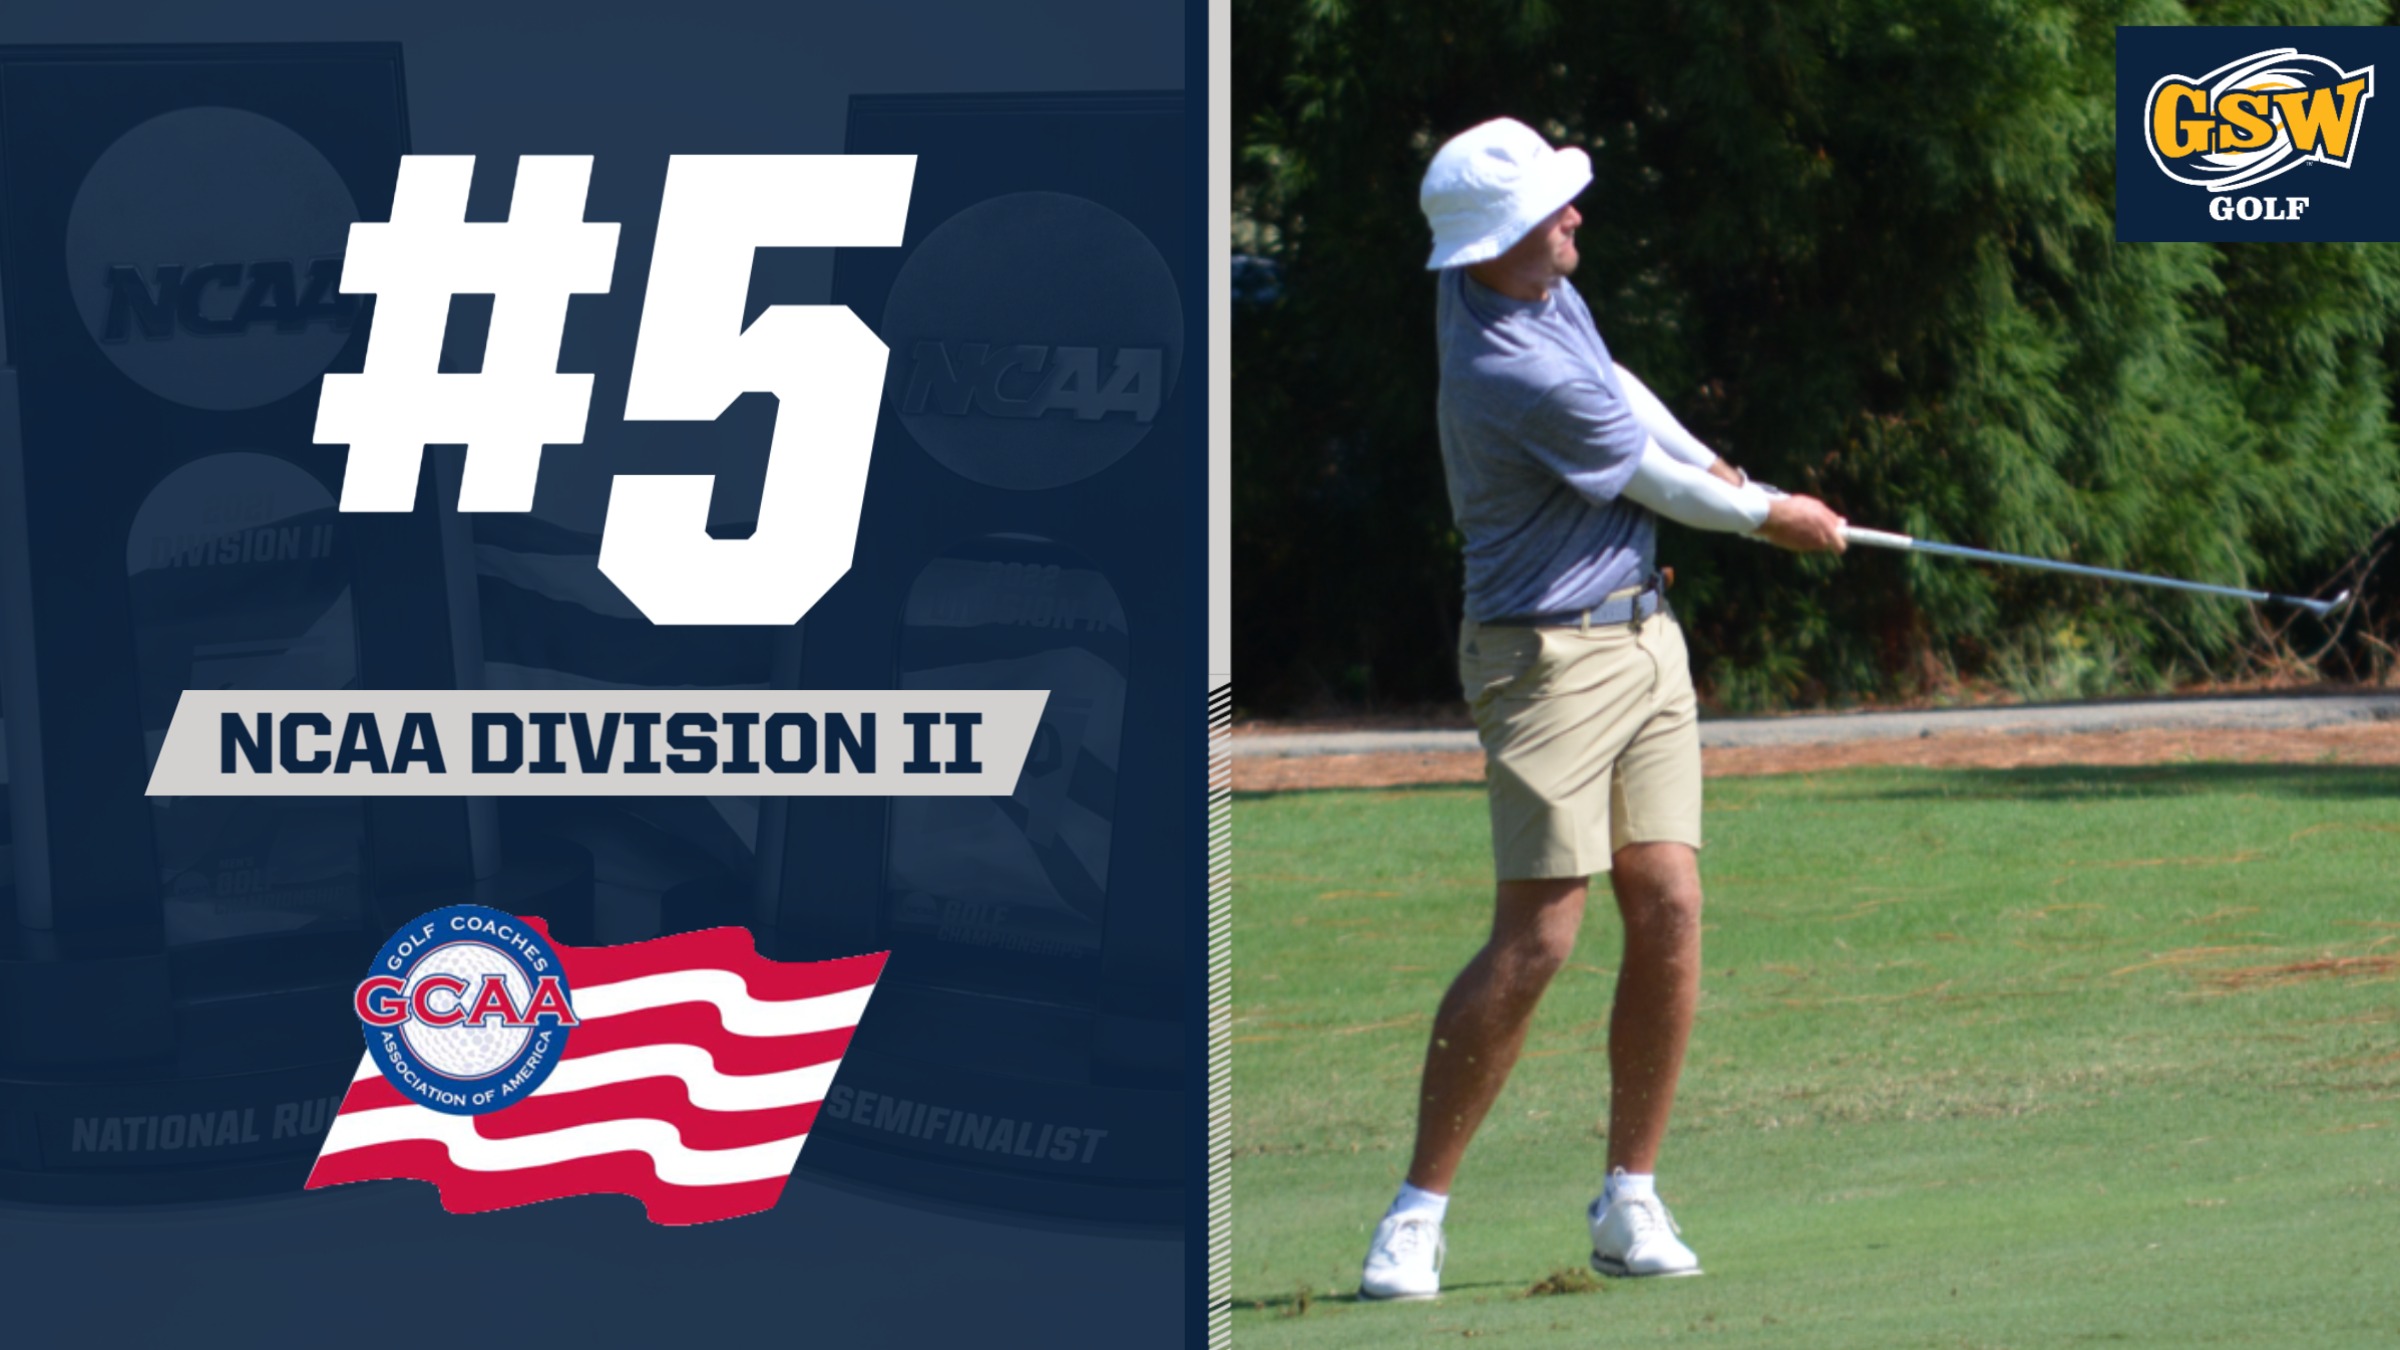 Hurricanes Remain at #5 in Latest NCAA Division II Coaches Poll